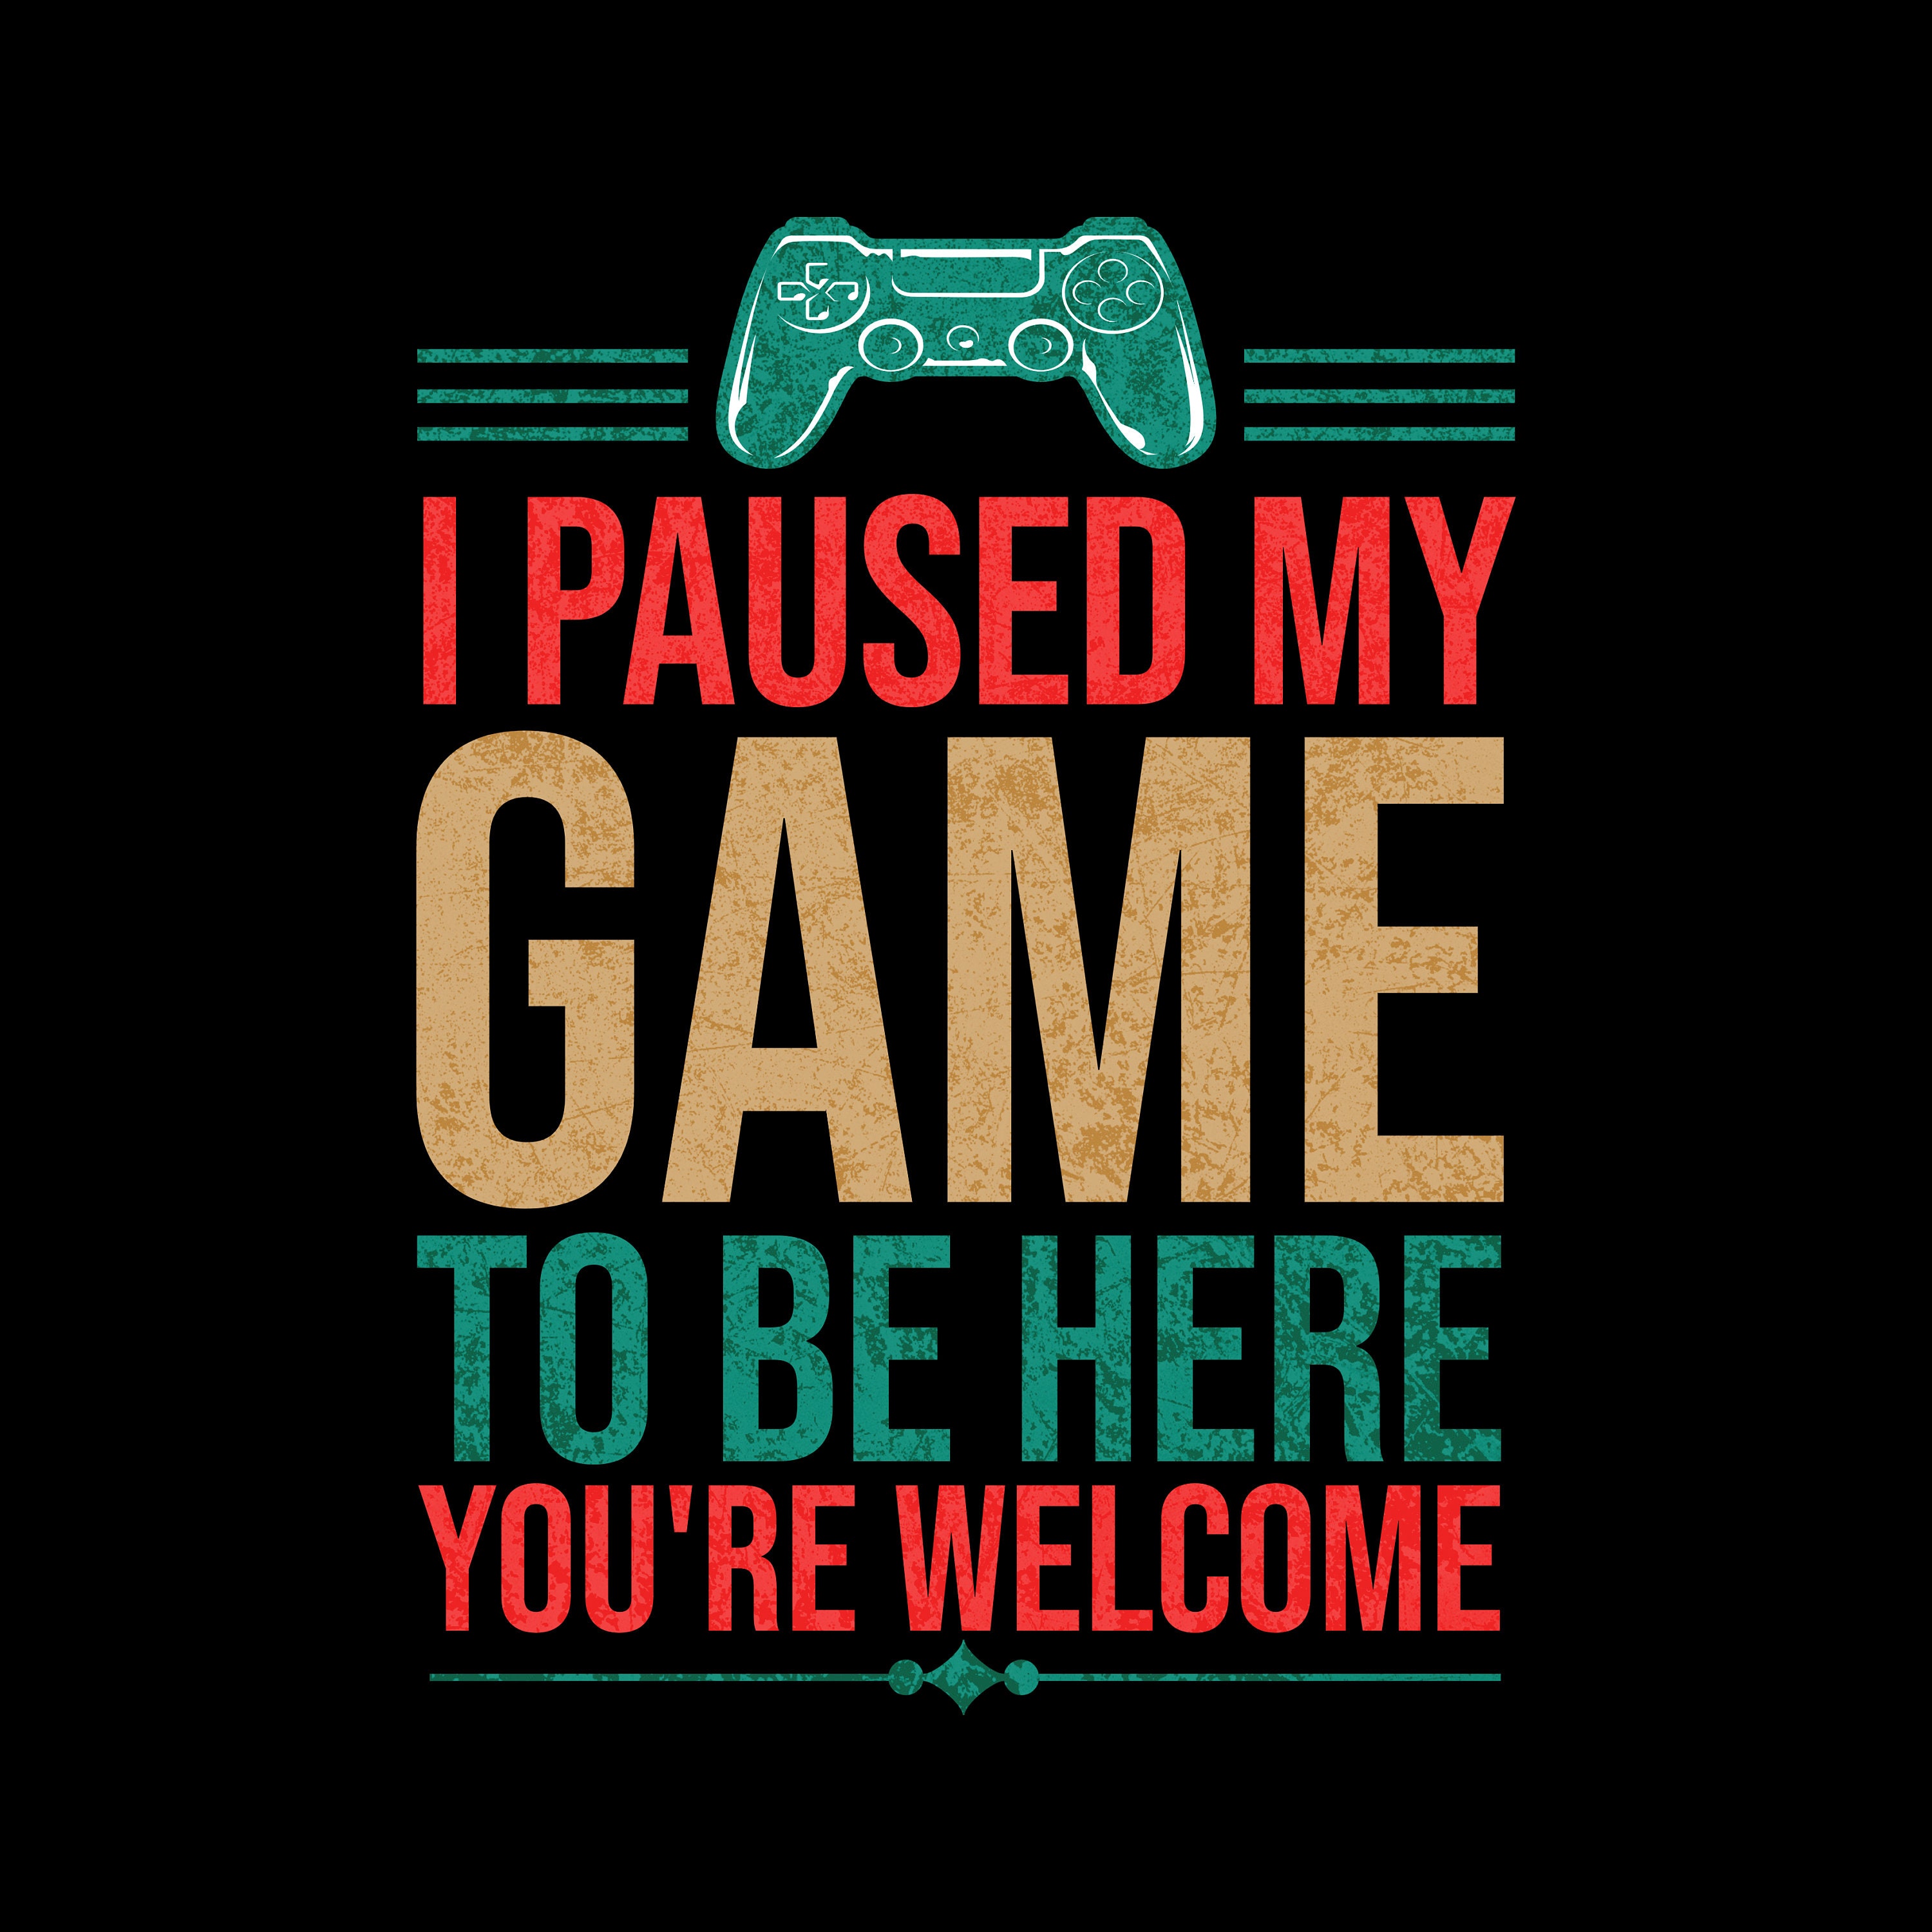 My game is paused talk fast or feed me pizza gaming t-shirt design. Online  video gamer t-shirt design. T-shirt design ideas. T-shirt design quotes pro  download 20913276 Vector Art at Vecteezy